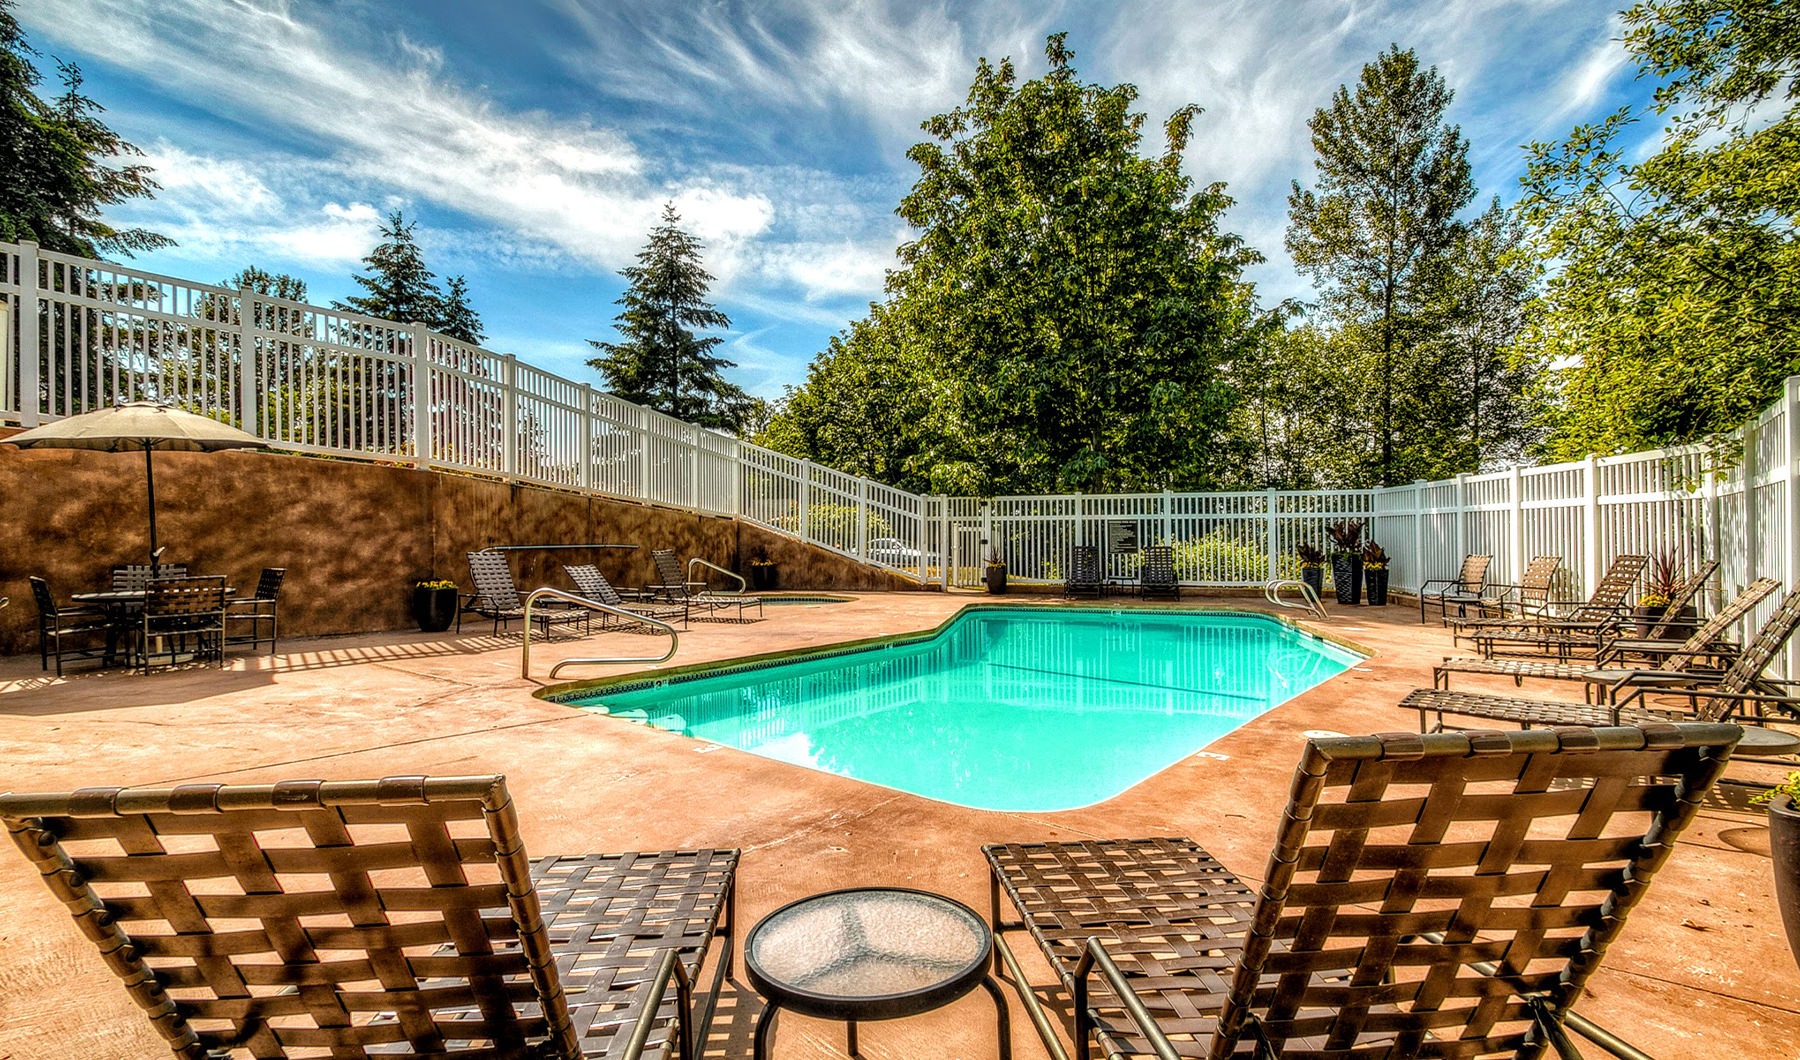 Outdoor heated pool with lounge chairs